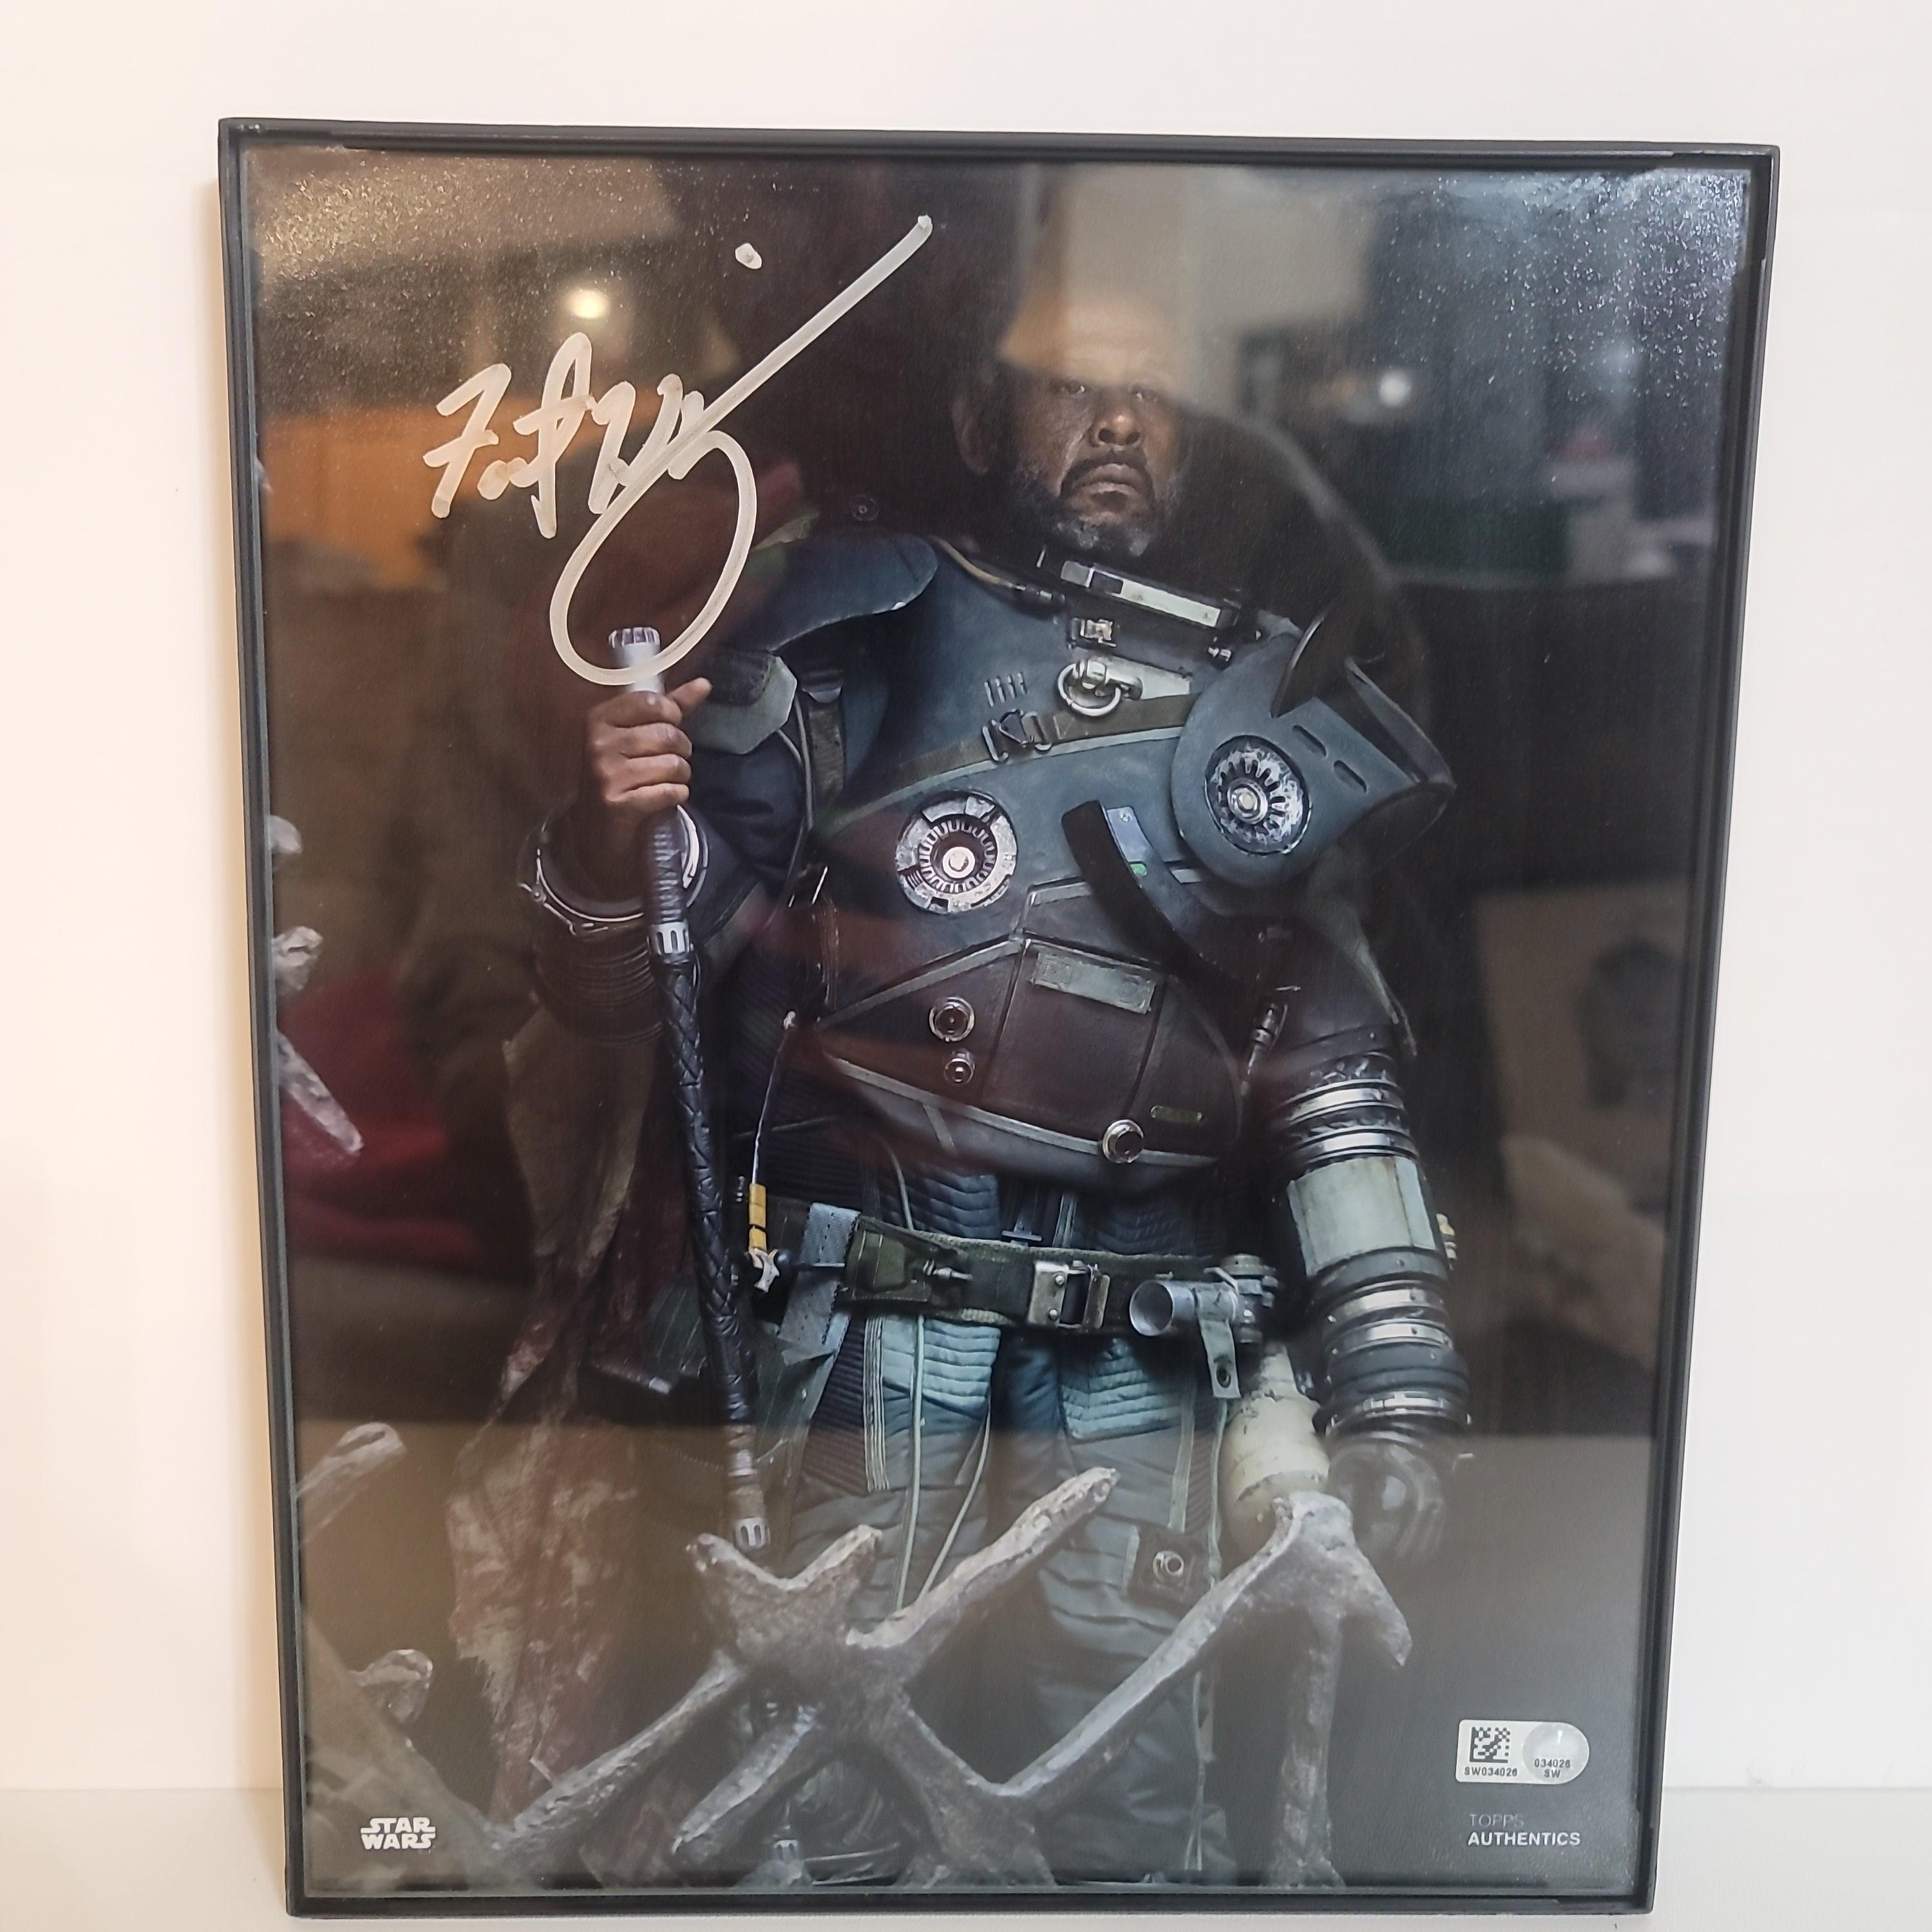 Autographed Star Wars Saw Gurrera Photo Forrest Whitaker - Rogue Toys